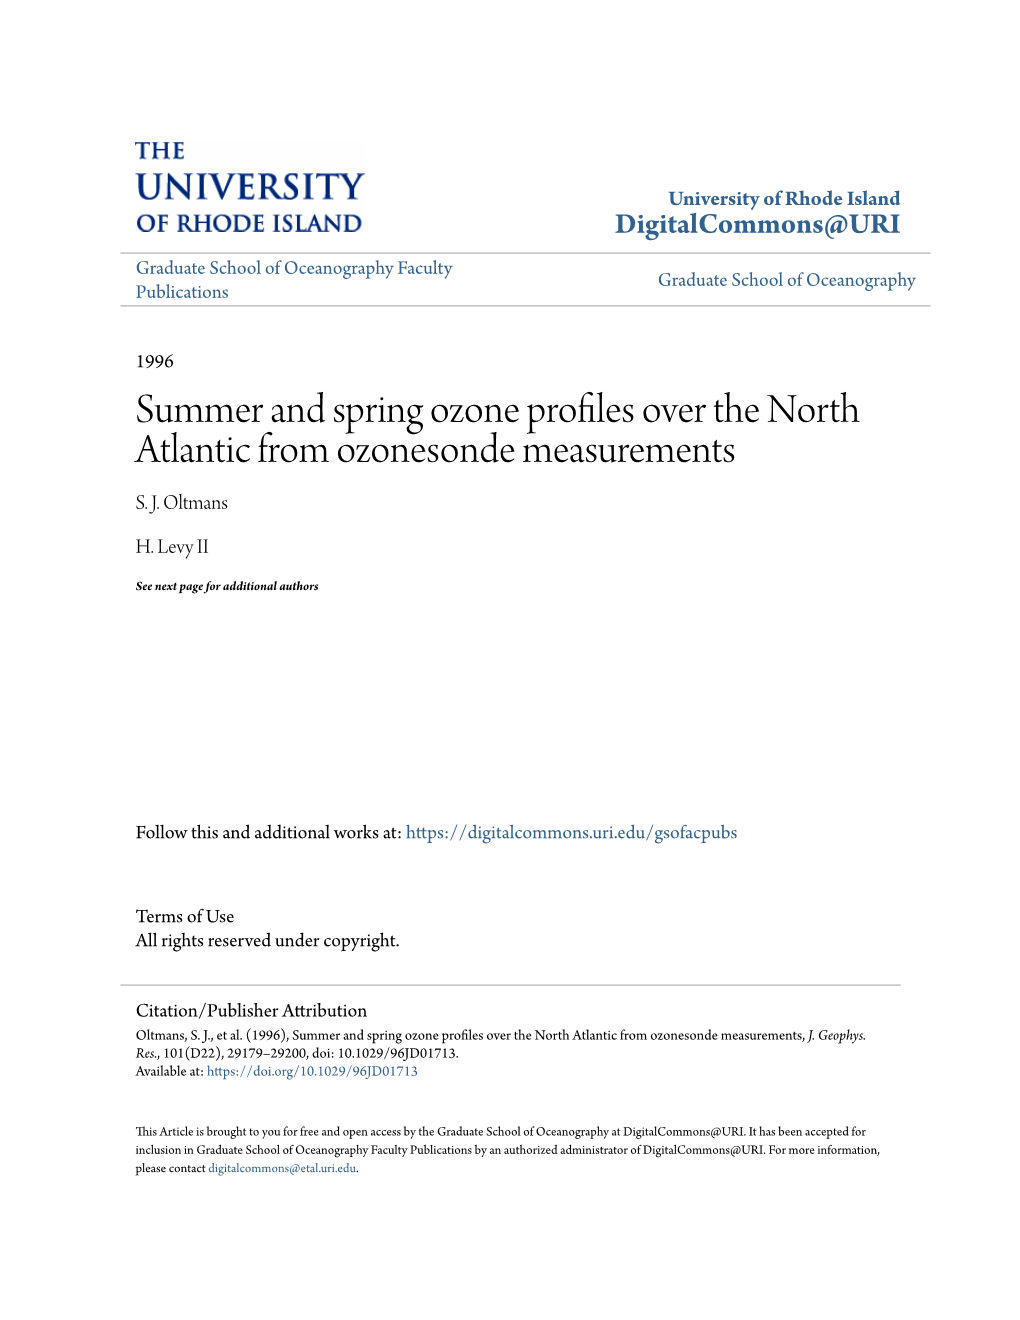 Summer and Spring Ozone Profiles Over the North Atlantic from Ozonesonde Measurements S